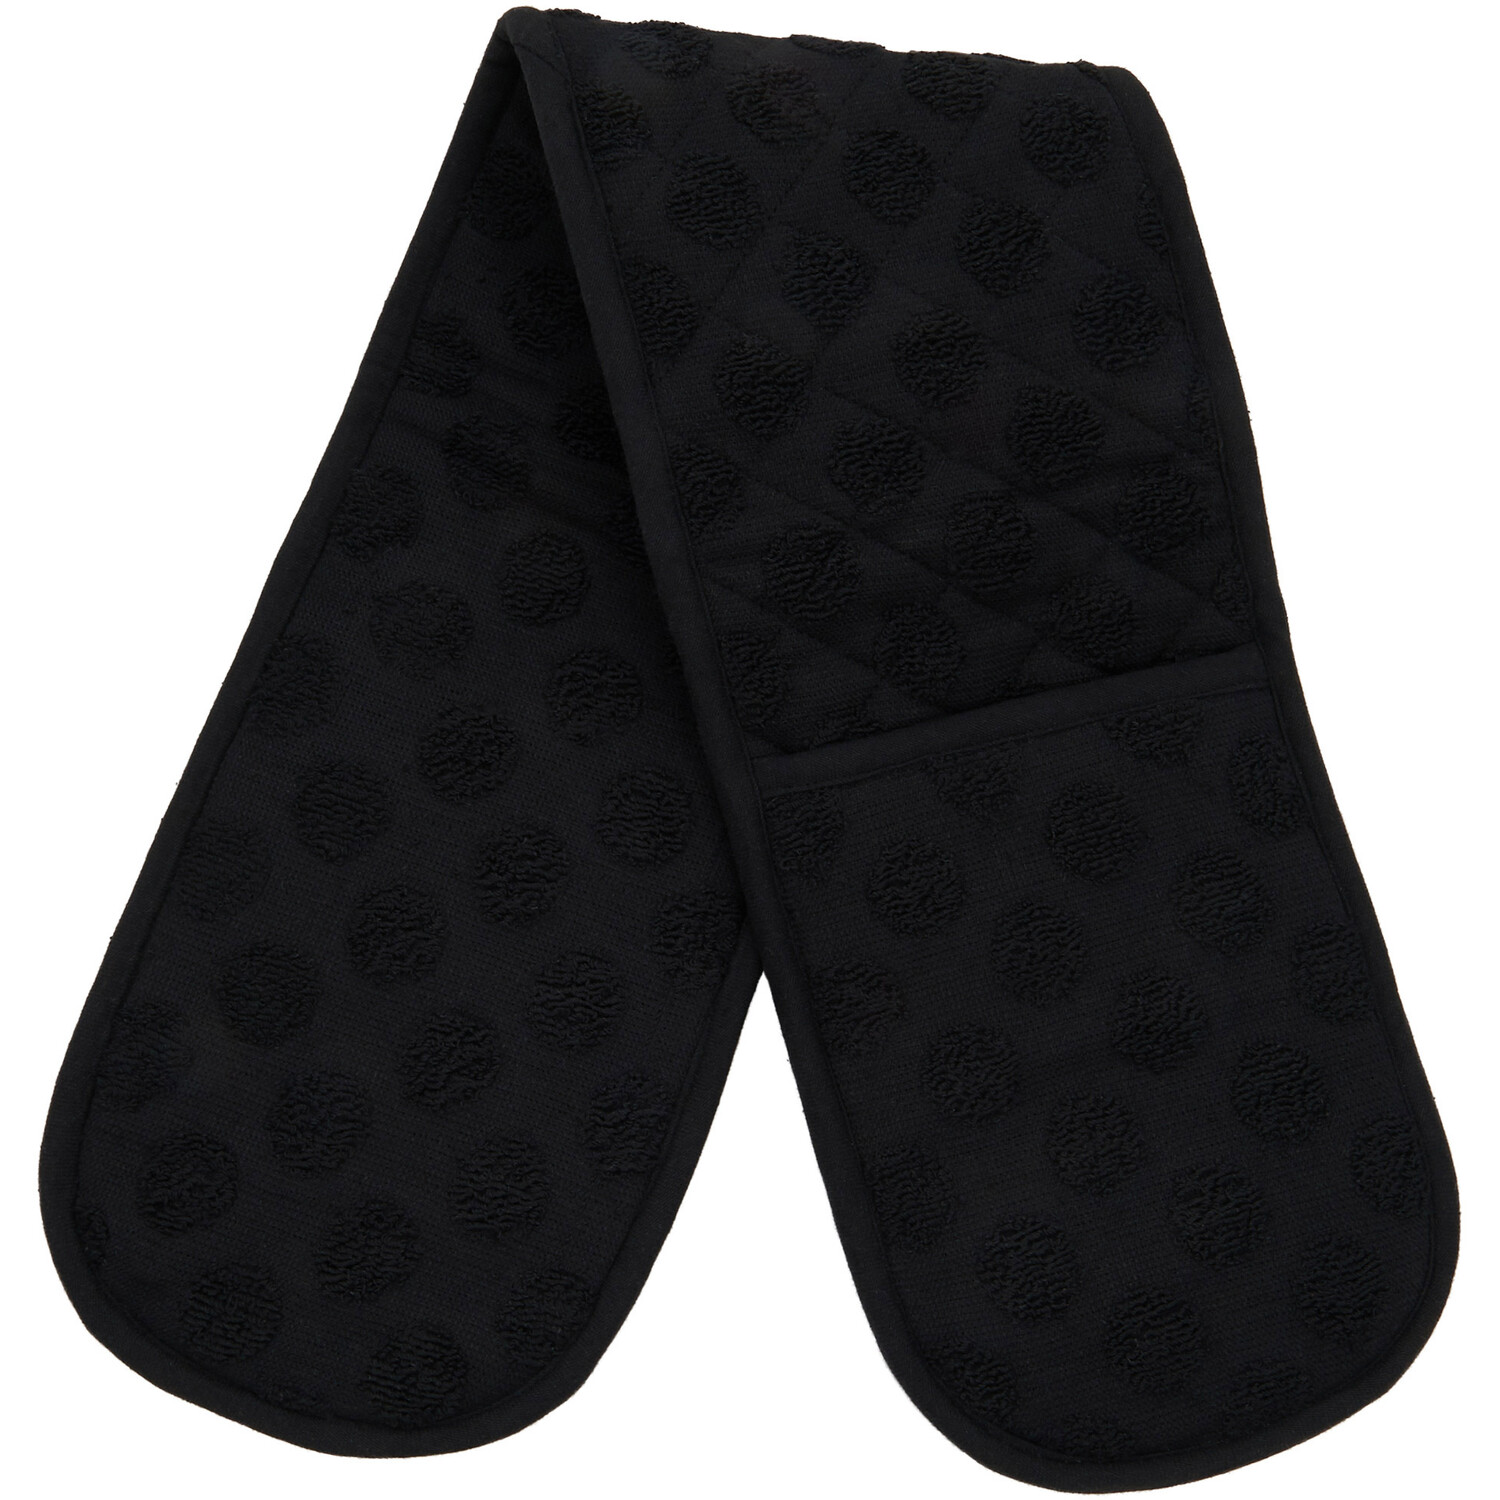 Dobby Terry Double Oven Glove - Black Image 6